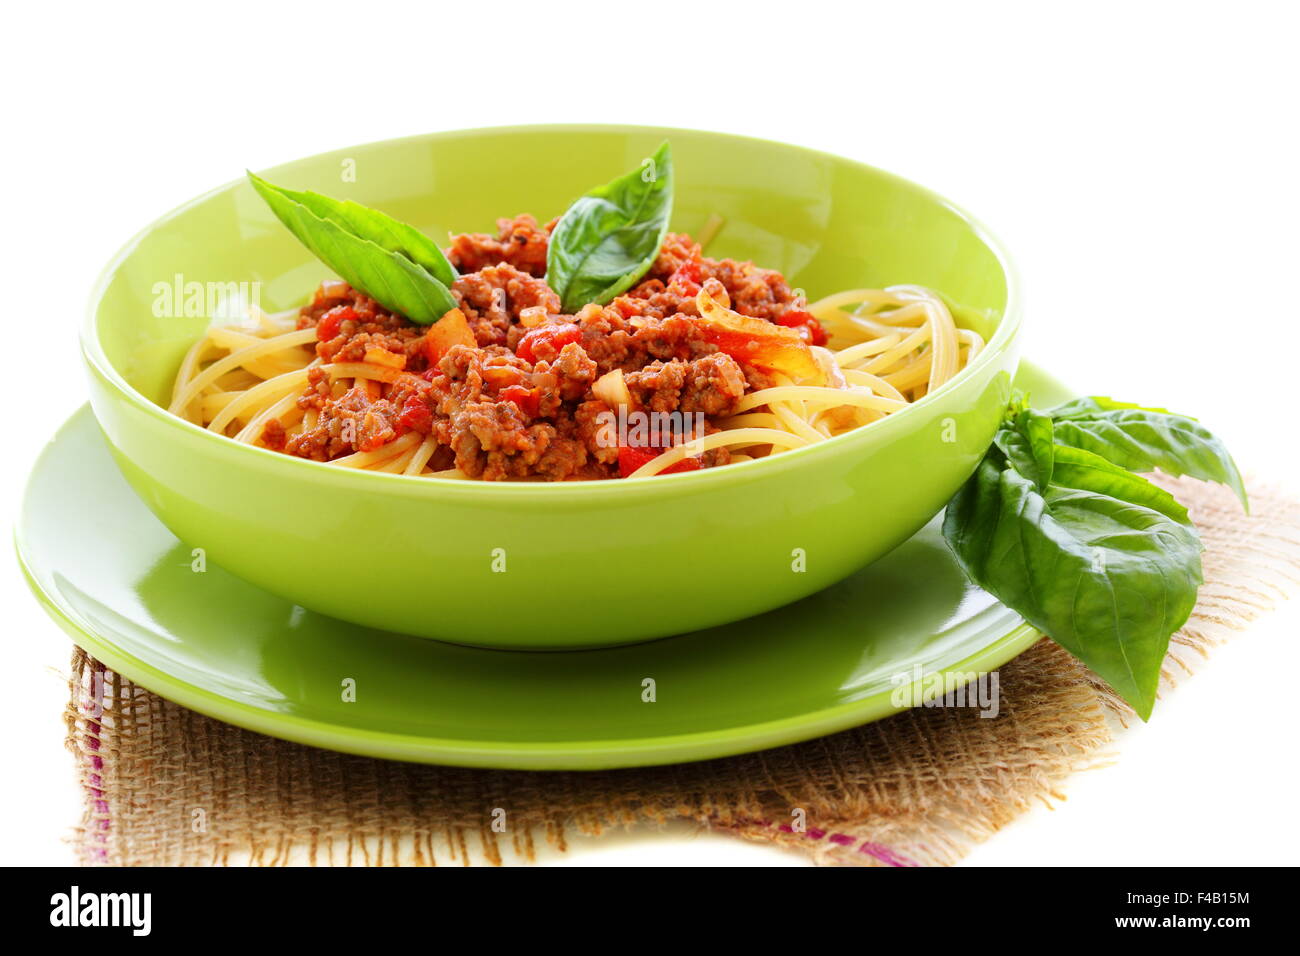 Spaghetti with Bolognese sauce. Stock Photo